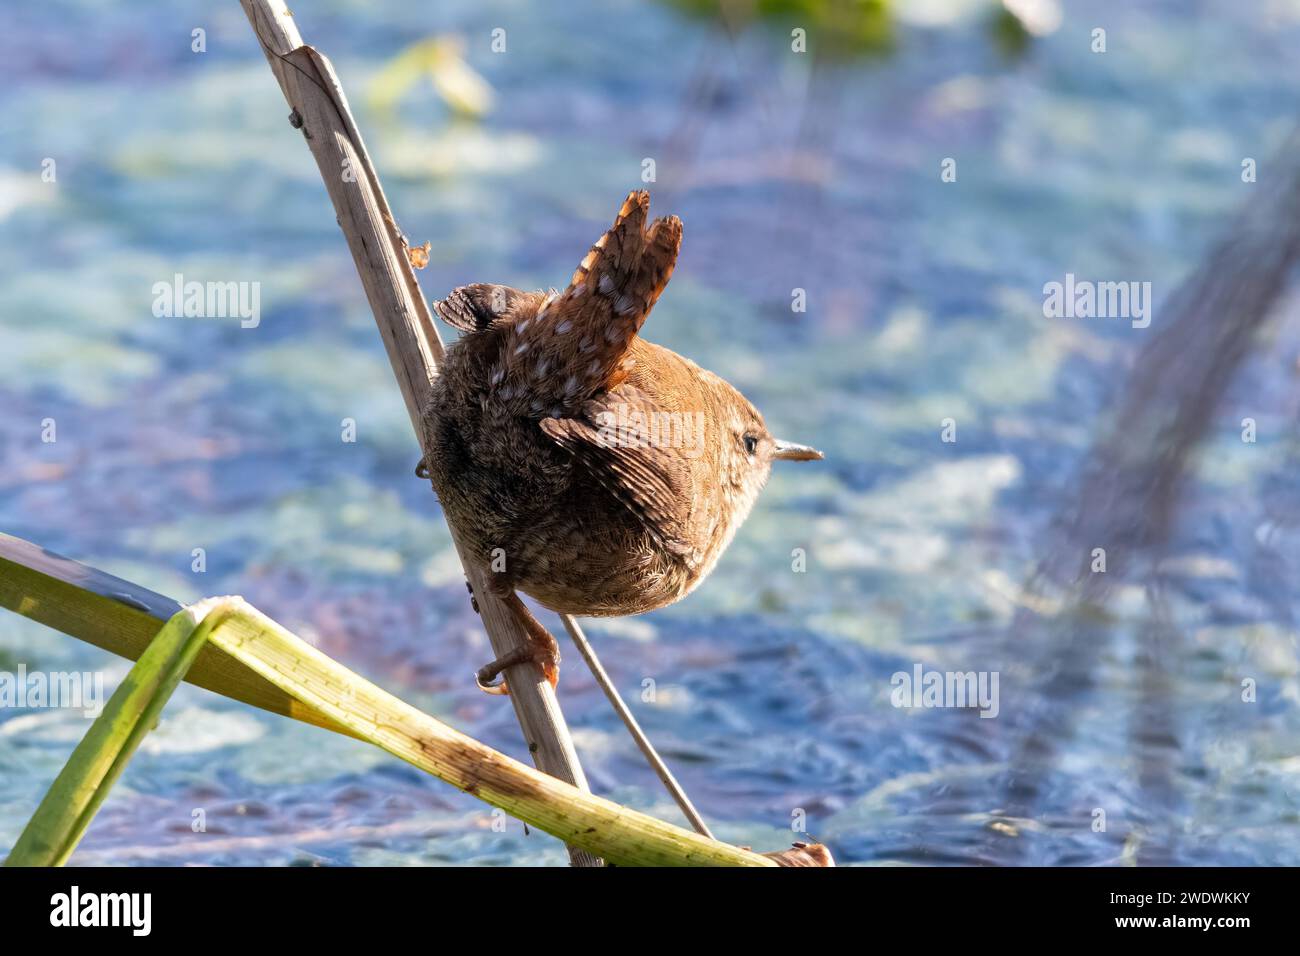 A wren (Troglodytes troglodytes) foraging among reeds at the edge of a frozen canal during winter, England, UK Stock Photo